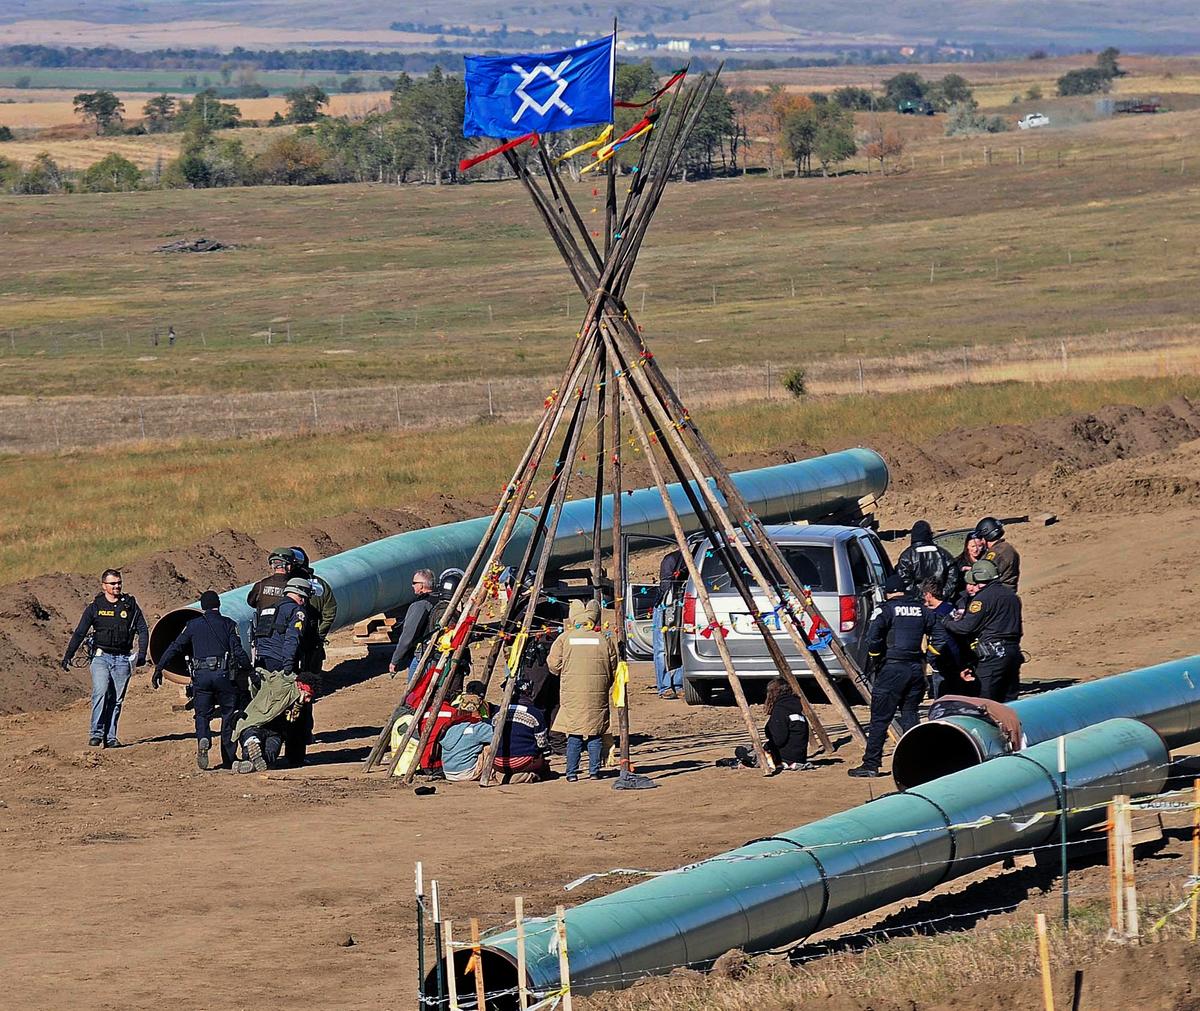 Law enforcement officers (L) drag a person from a protest against the Dakota Access Pipeline, near the town of St. Anthony in rural Morton County, N.D., on Oct. 10, 2016. (Tom Stromme/The Bismarck Tribune via AP)